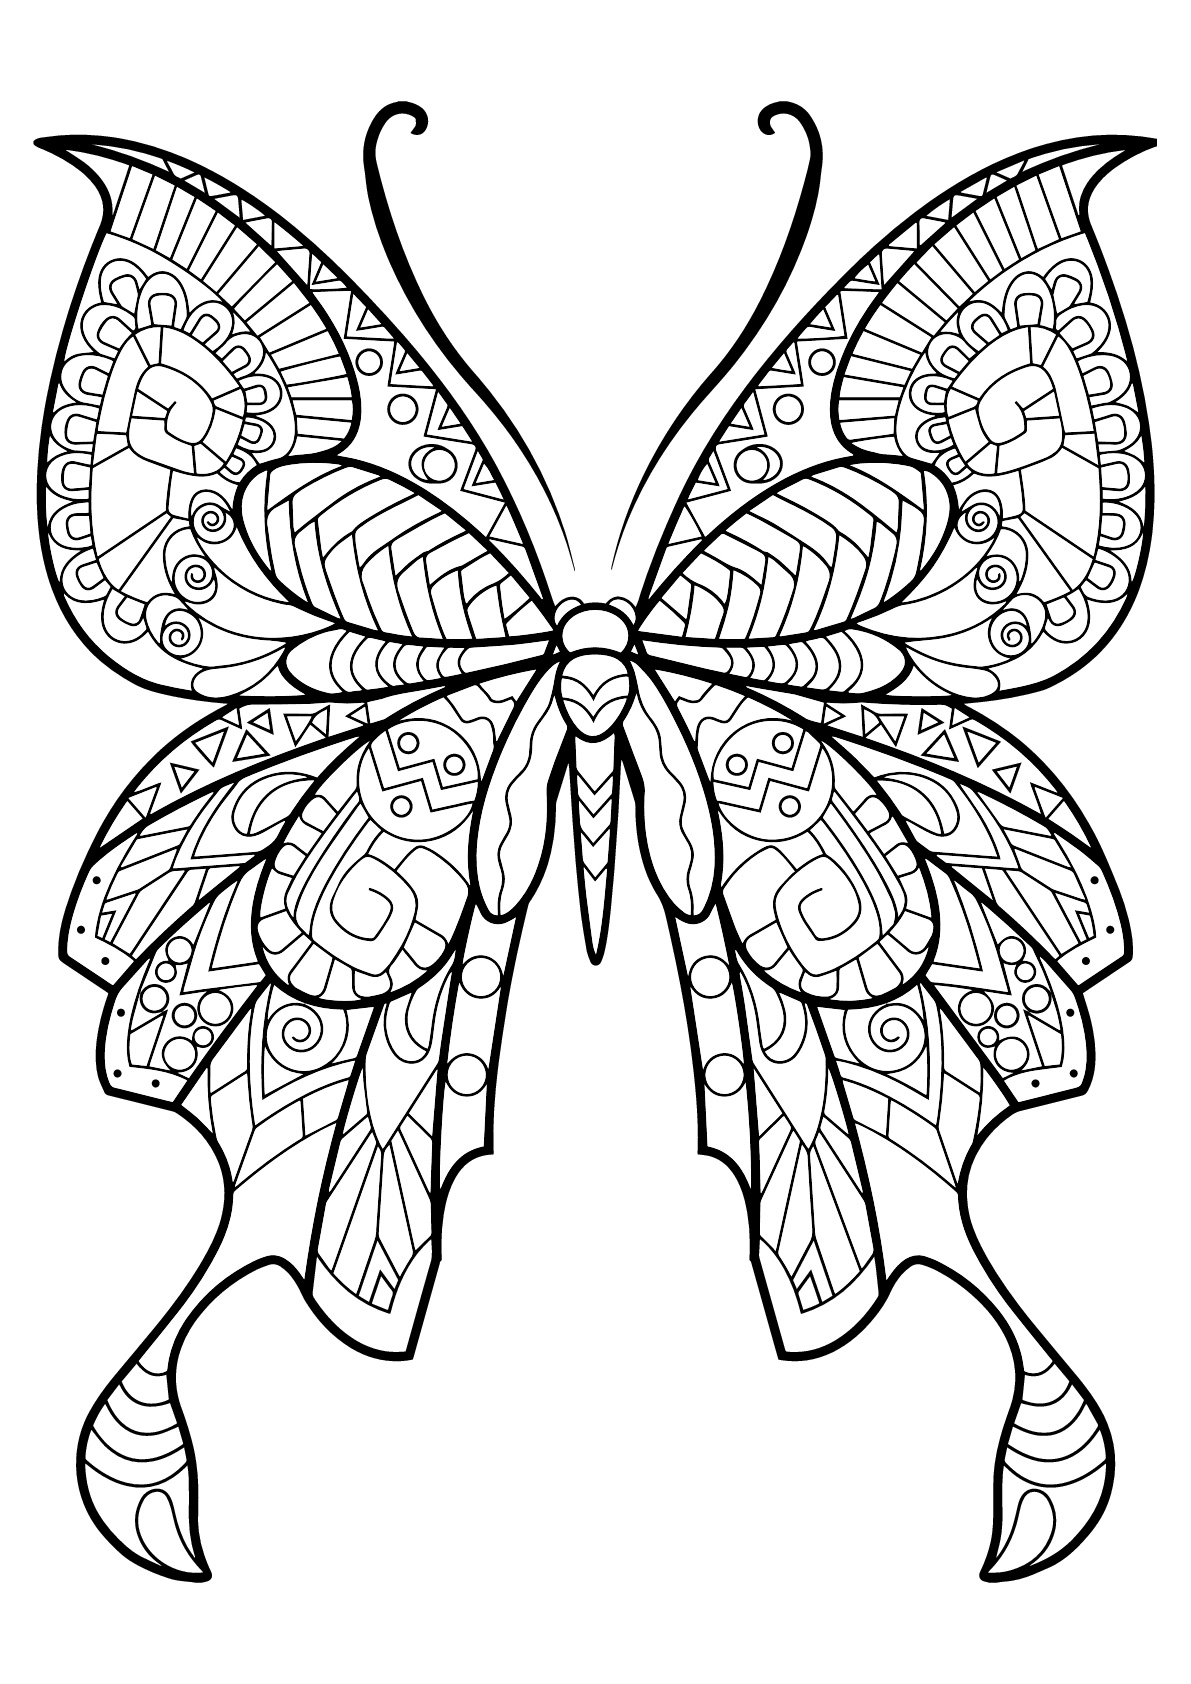 Butterflies to color for kids - Butterflies Kids Coloring ...